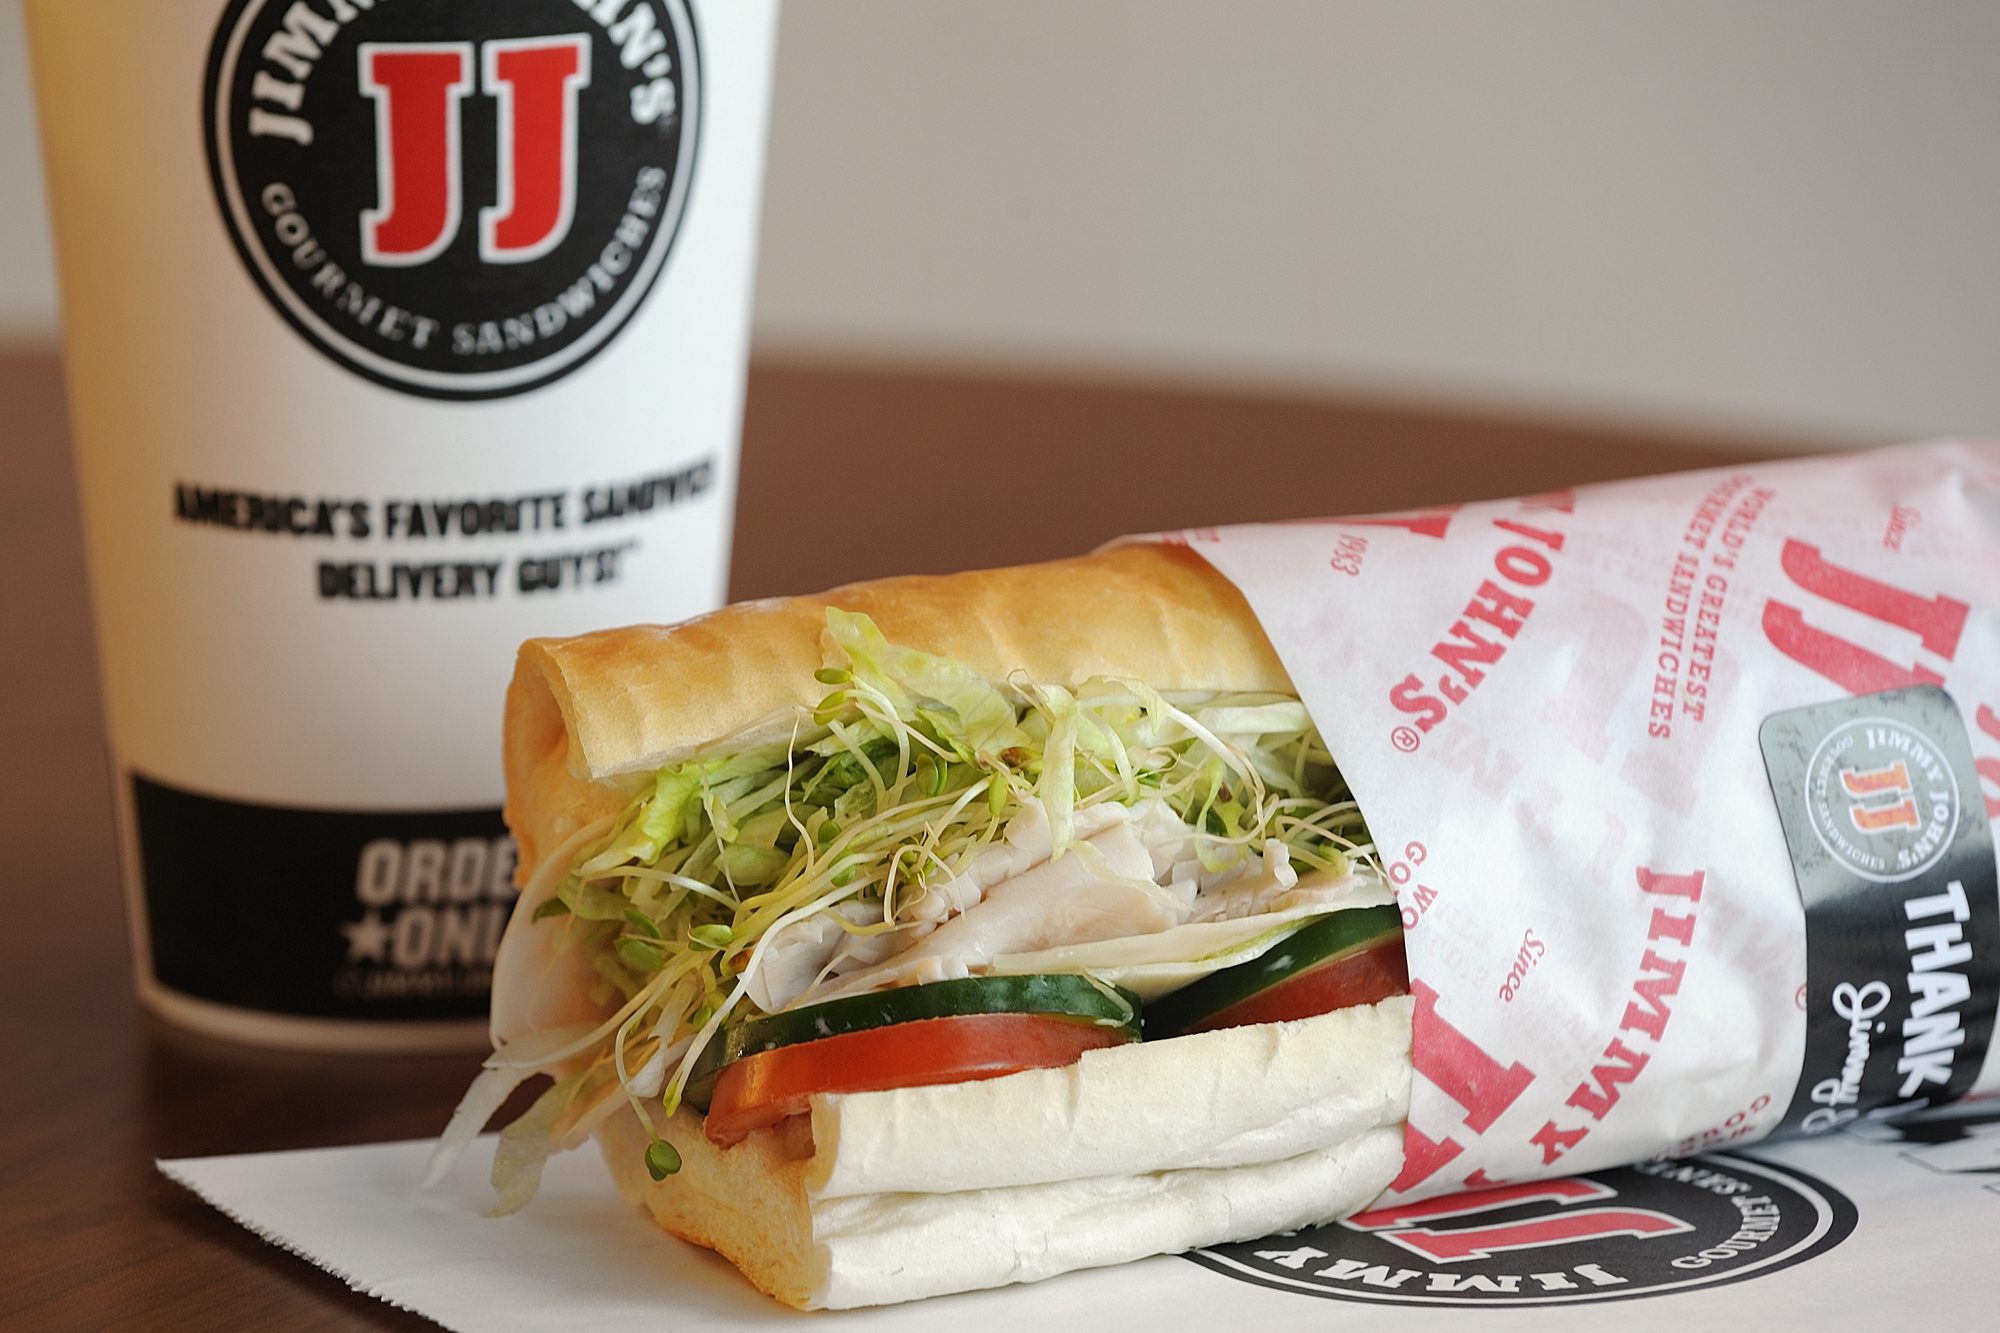 Jimmy John's Beach Club, made with turkey, provolone, avocado spread, sliced cucumber, sprouts, lettuce, tomato and mayonnaise, is one of the more popular choices at the Camas restaurant.